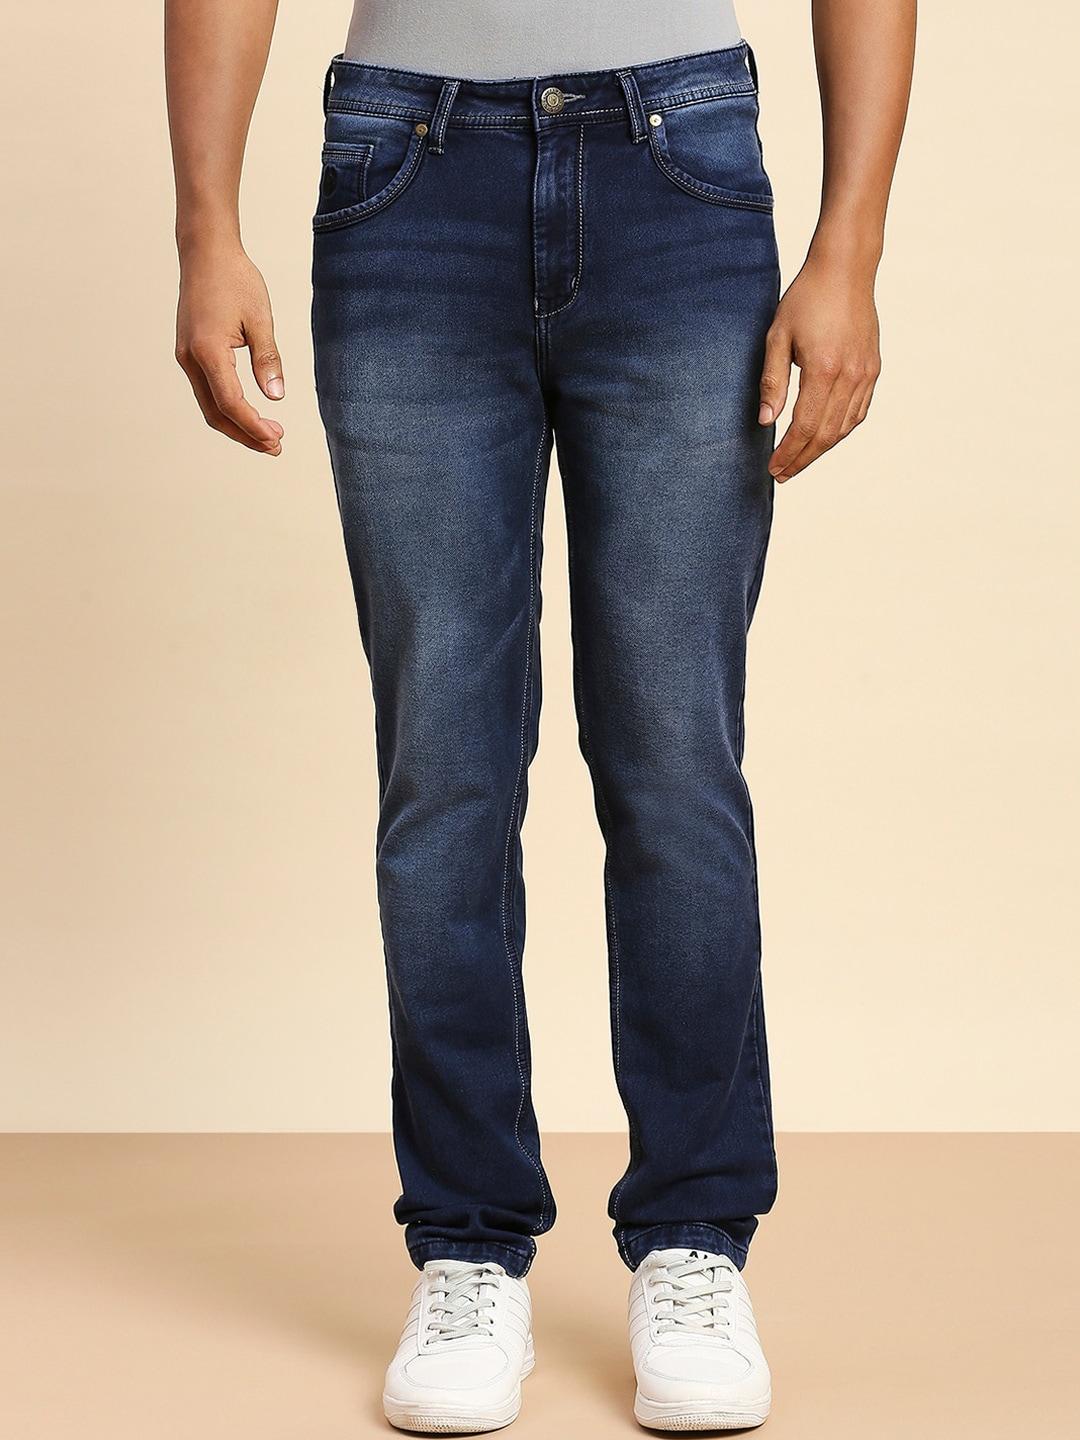 hj hasasi men high-rise light fade stretchable jeans